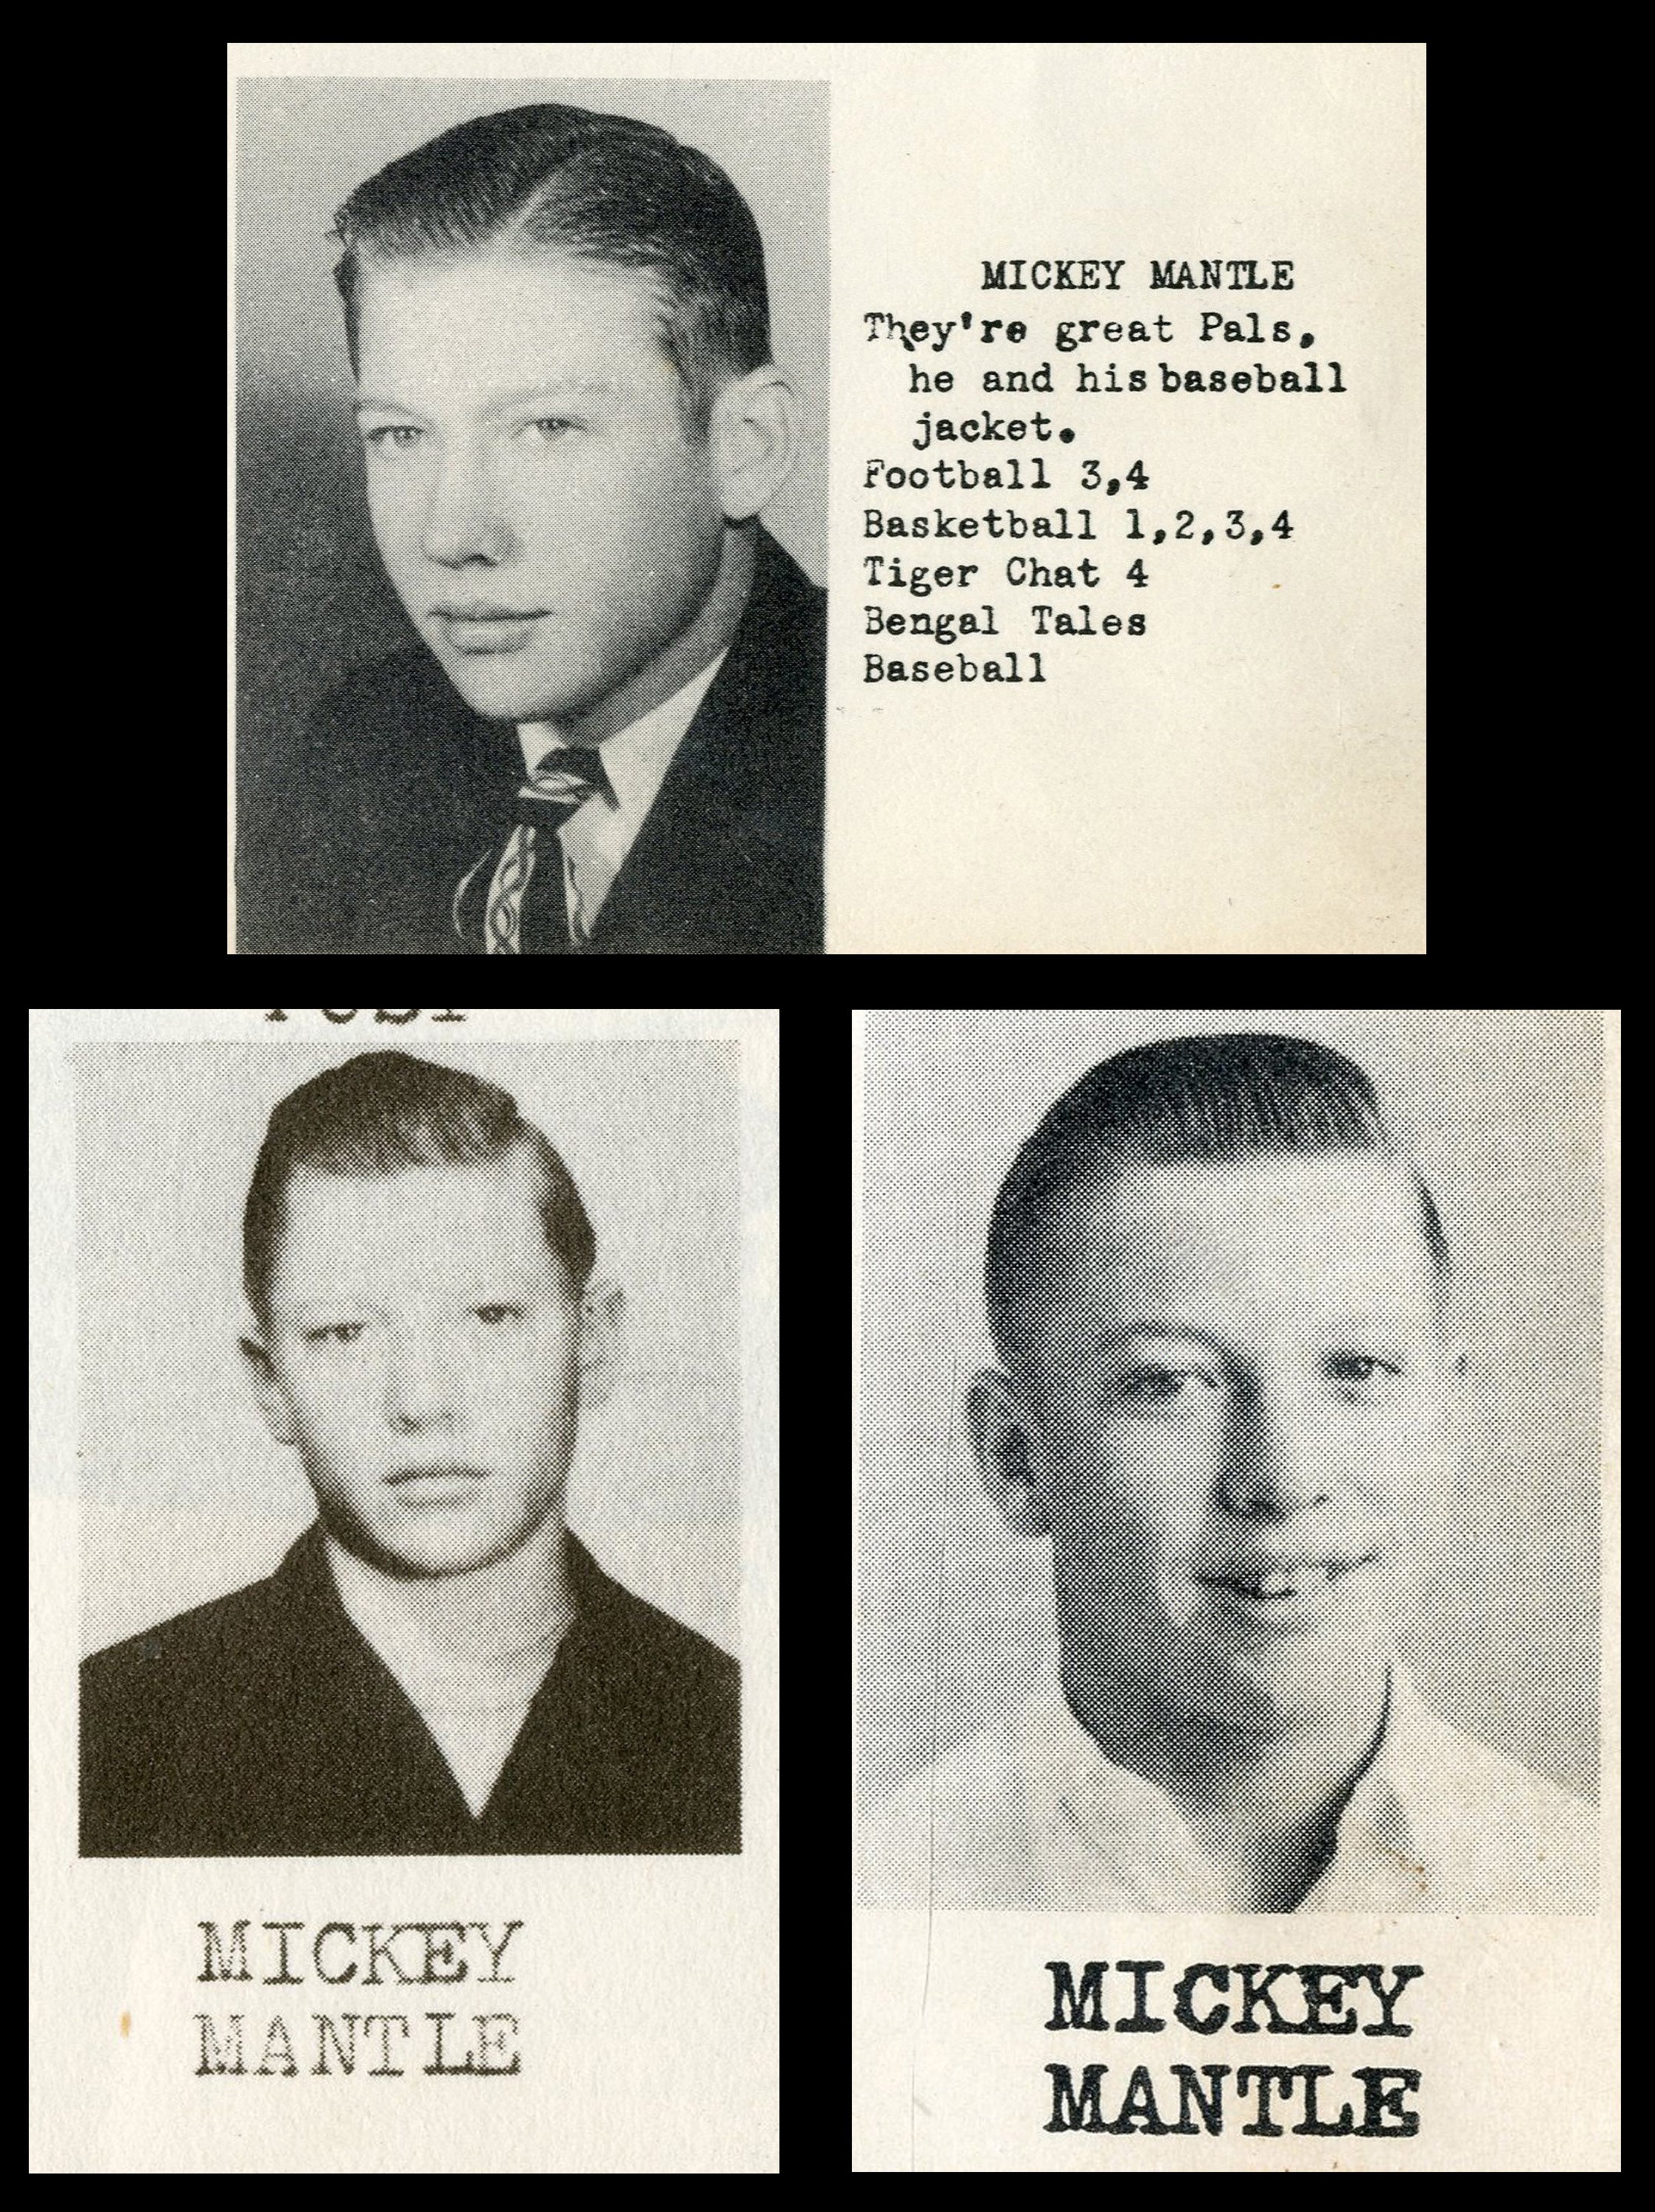 Mantle and Maris - 1947-49 Mickey Mantle High School Yearbook Near Complete Set (3)